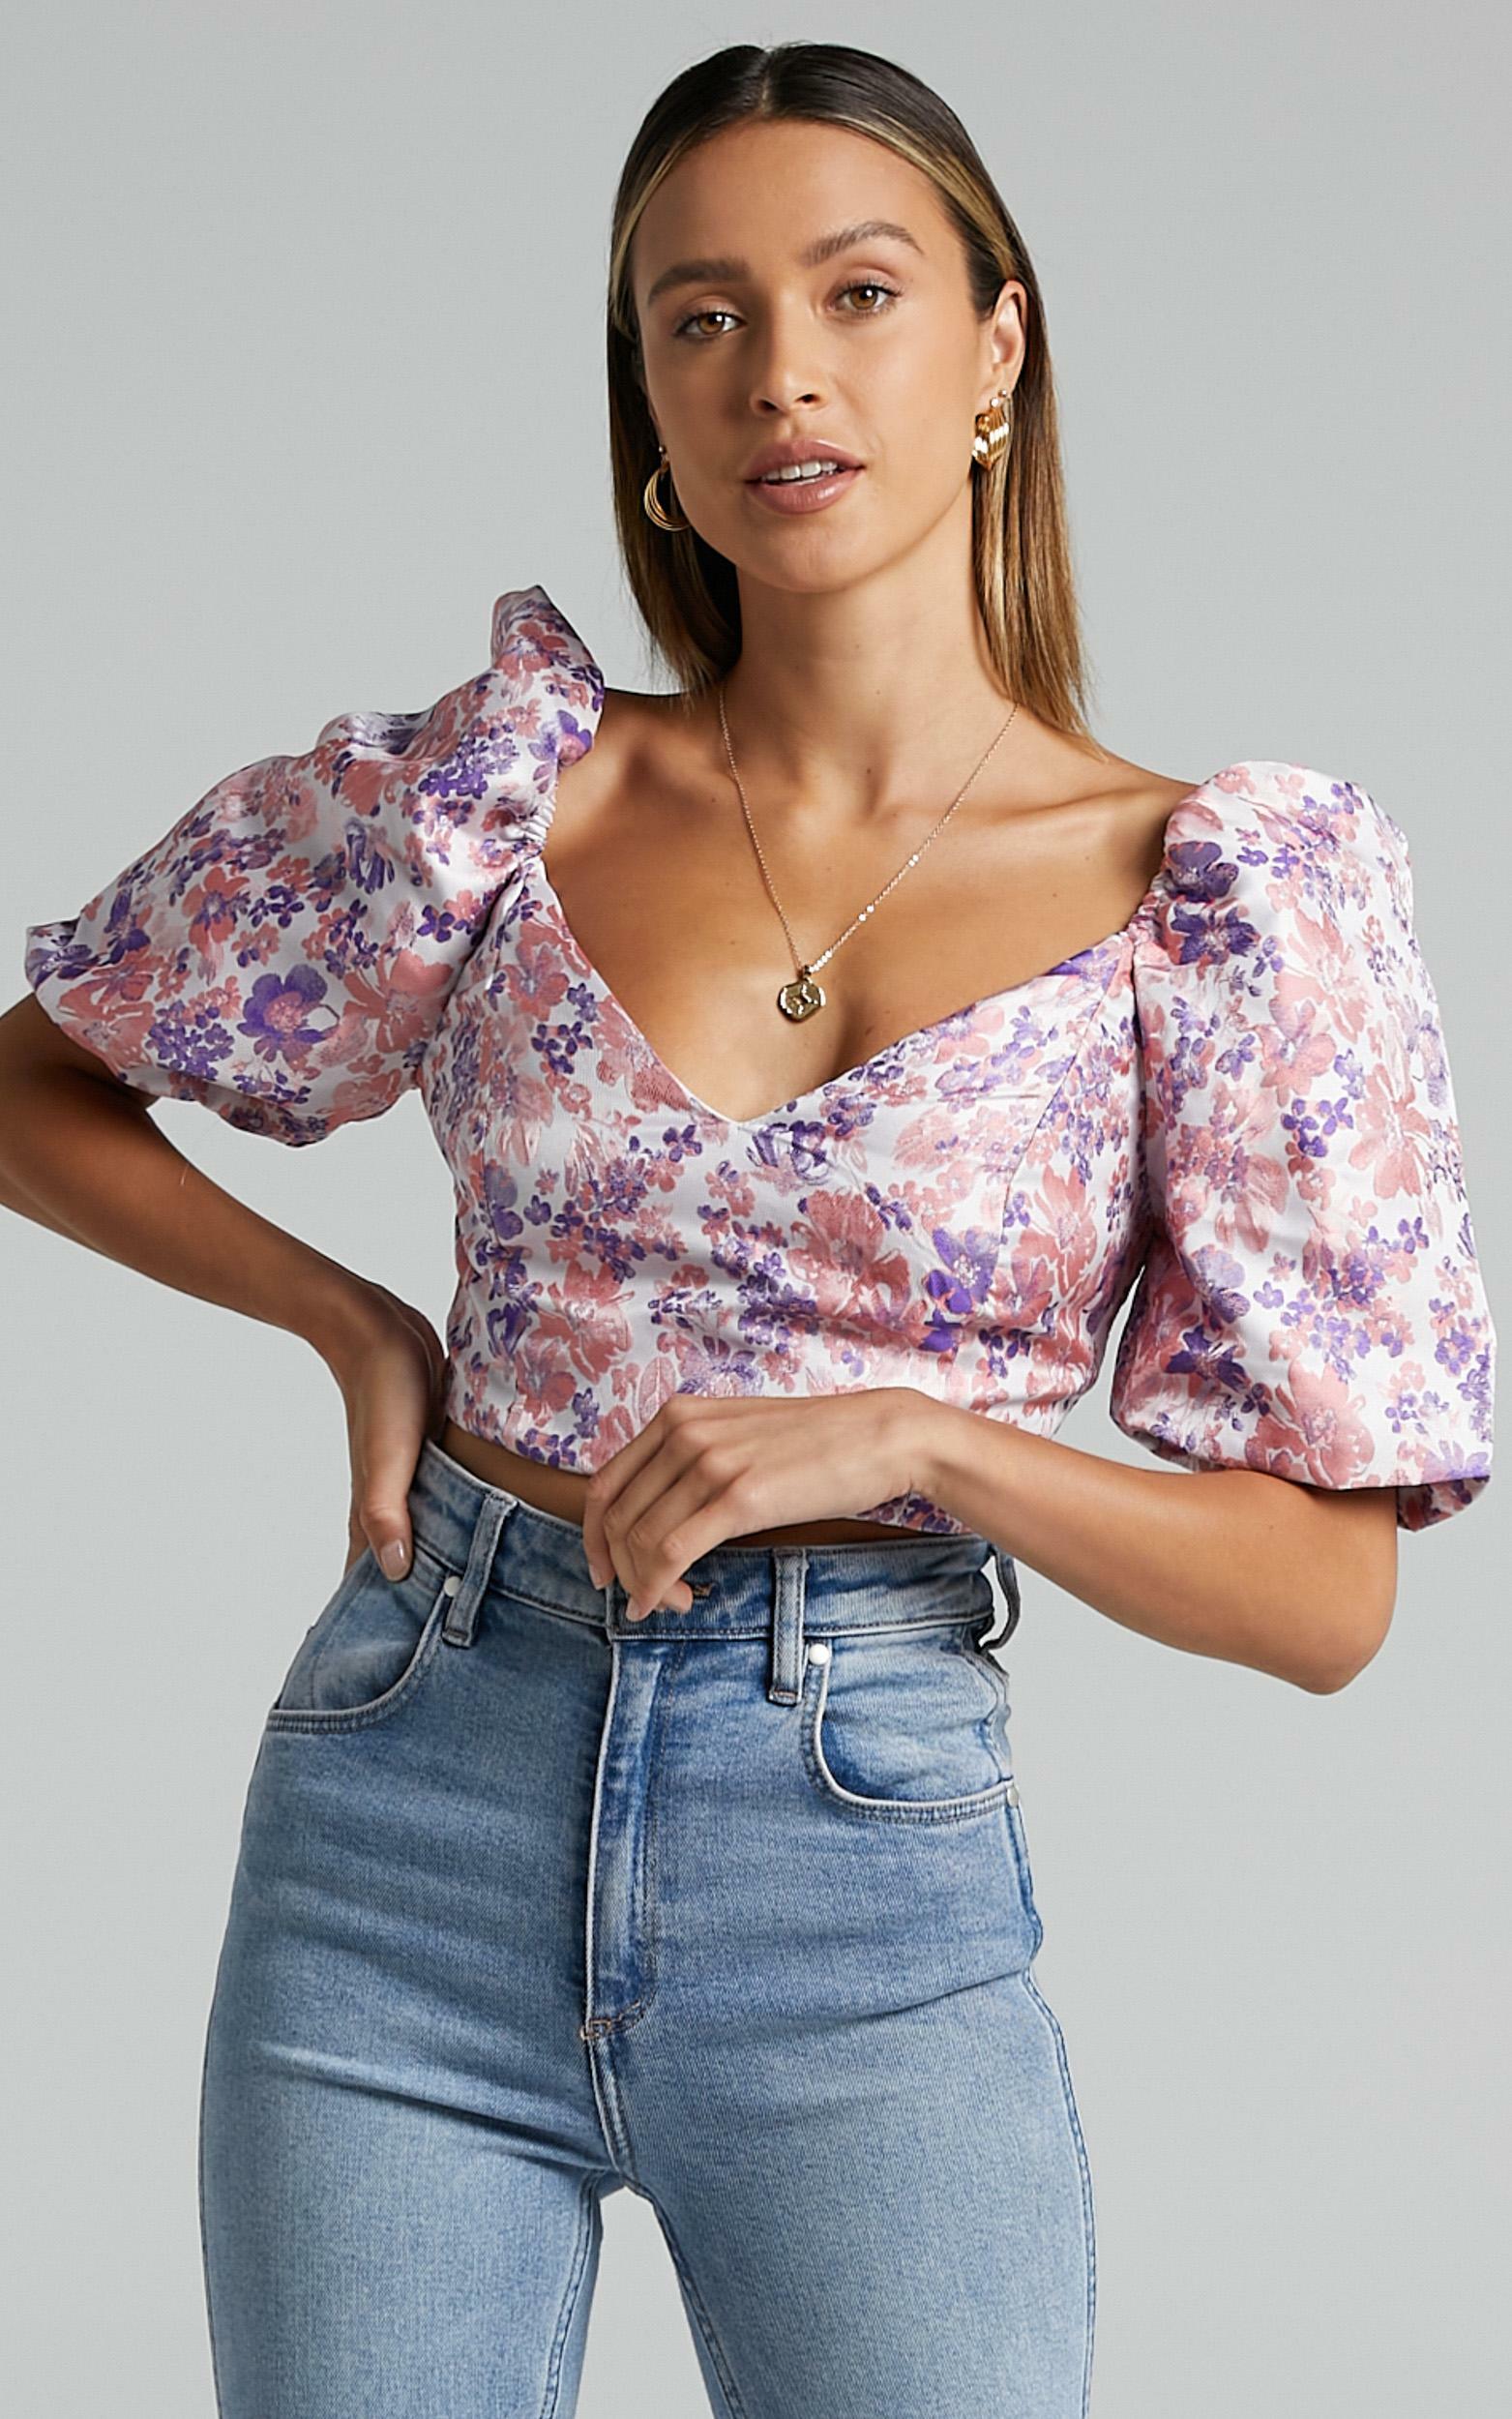 Ryliana Top in Multi Floral - 6 (XS), Multi, hi-res image number null